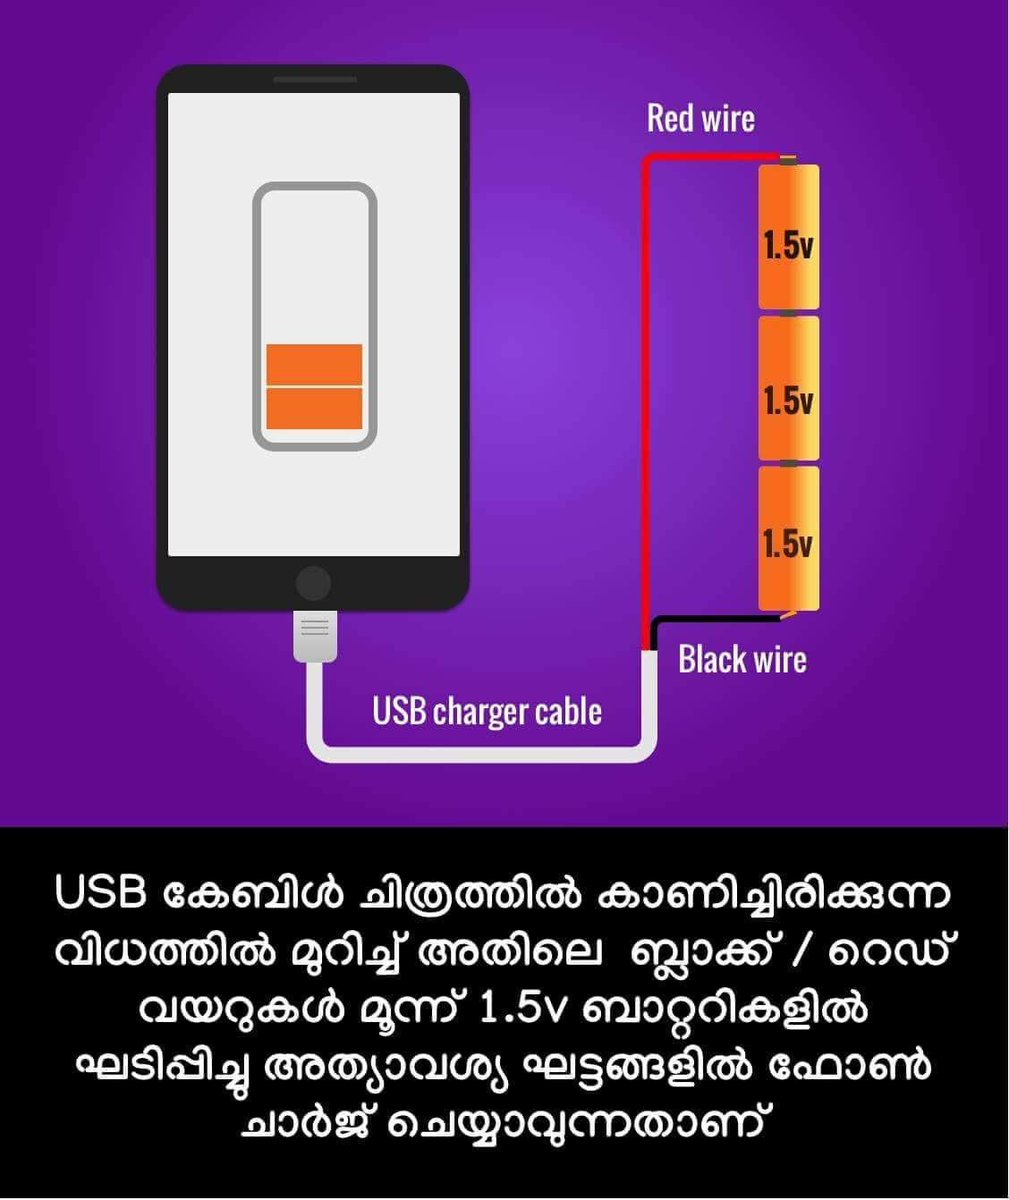 Pass this info to your dear ones as well.
You’ll find 4 wires inside a cable. Use the red and black to connect to a 3-5 battery set up as in the pic. ( red for top(+), and black for bottom(-) of the battery pack. Hold it for at least 10 minutes. #KeralaFlood #MobileCharging